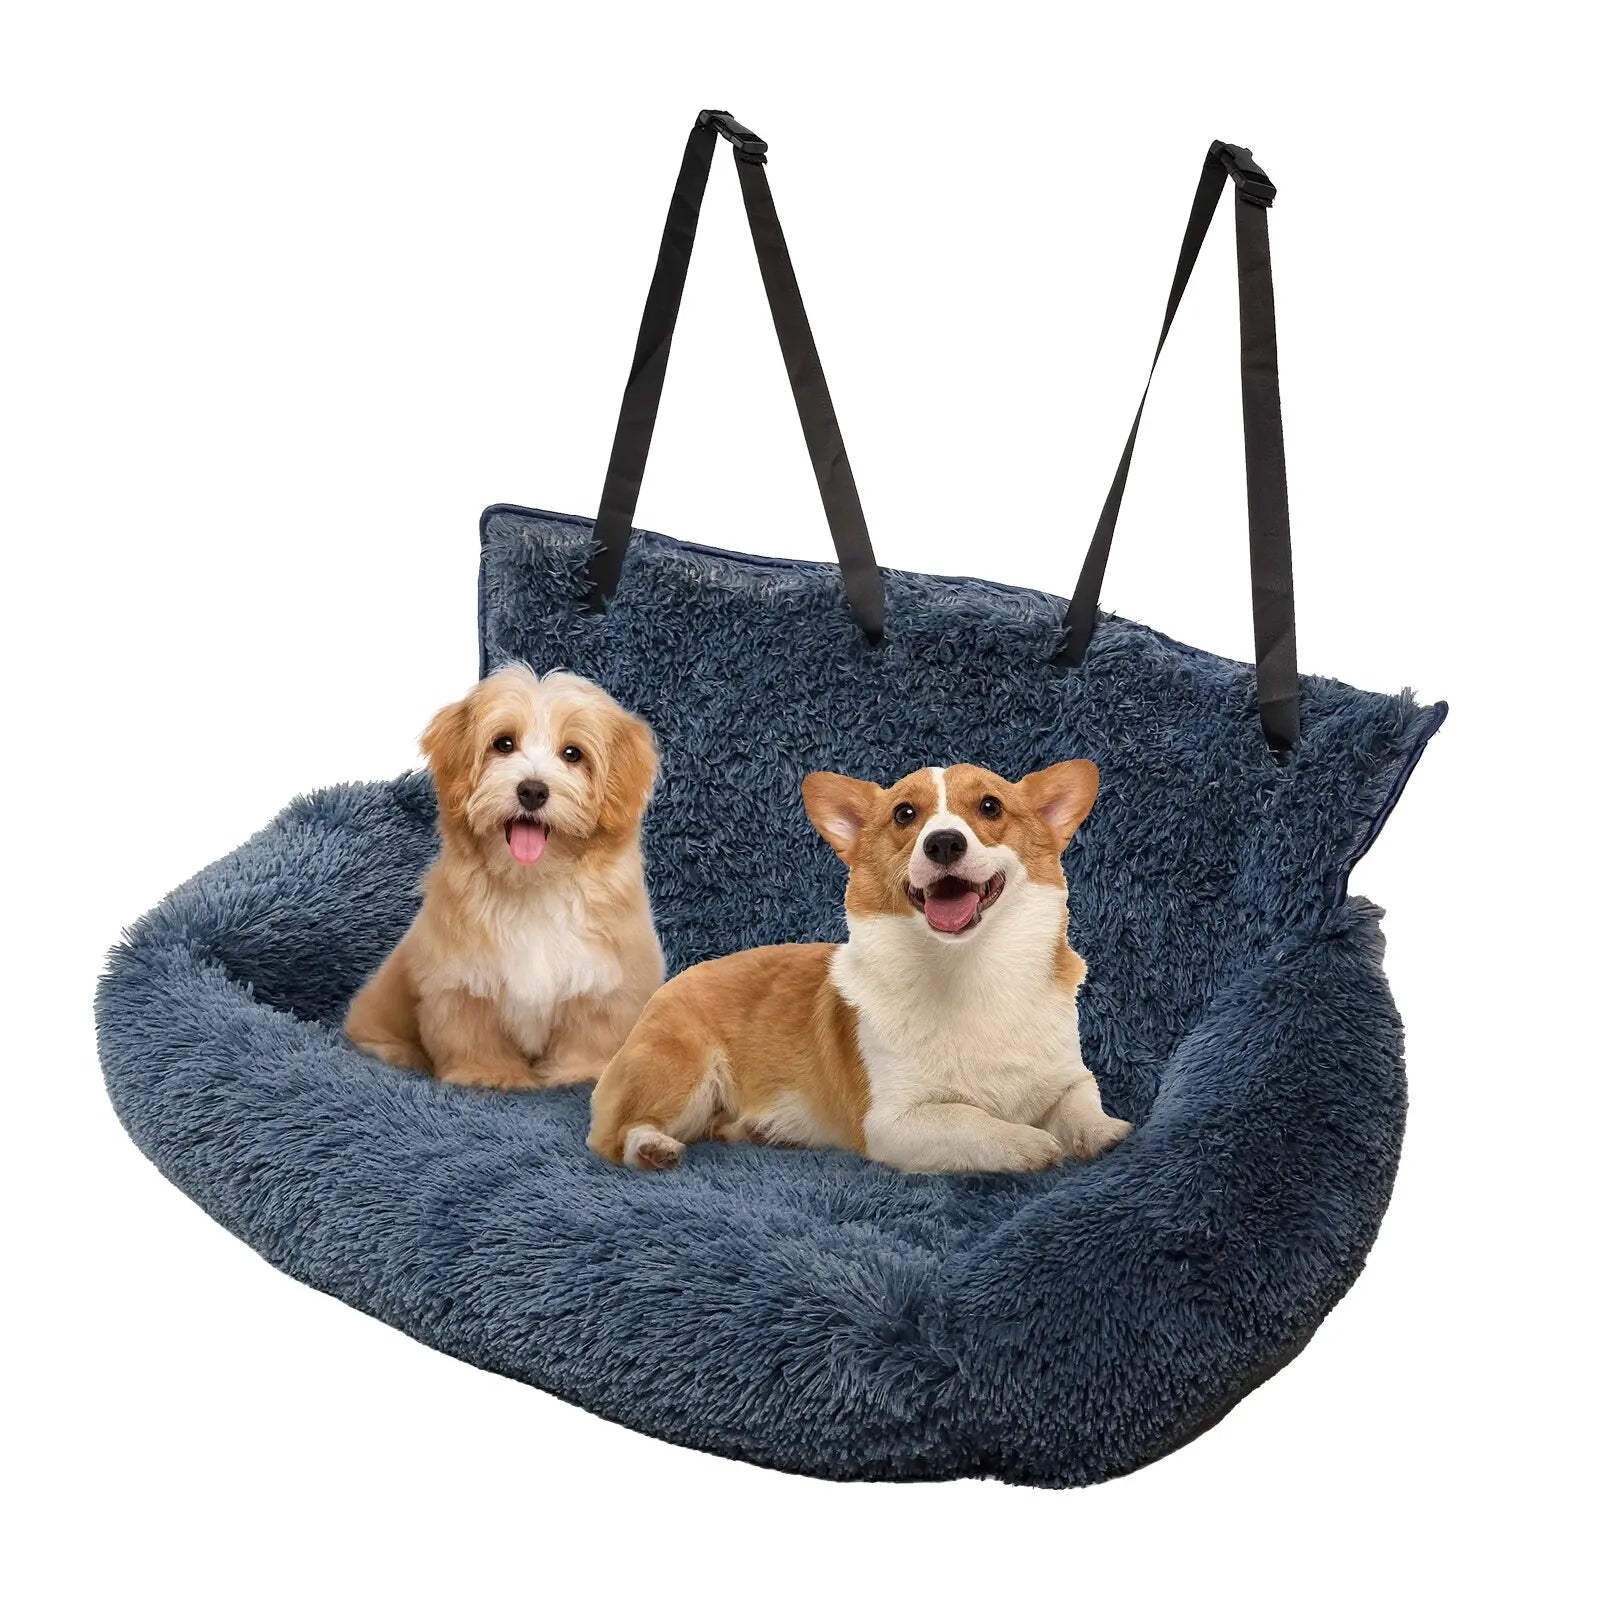 Pet Car Seat Dog Travel Multi-Functional Seat, Warm Plush Pet Booster Seat Travel Dog Car Bed with Storage Pocket and Clip-On Safety Leash Comfortable Dogs Car Seat